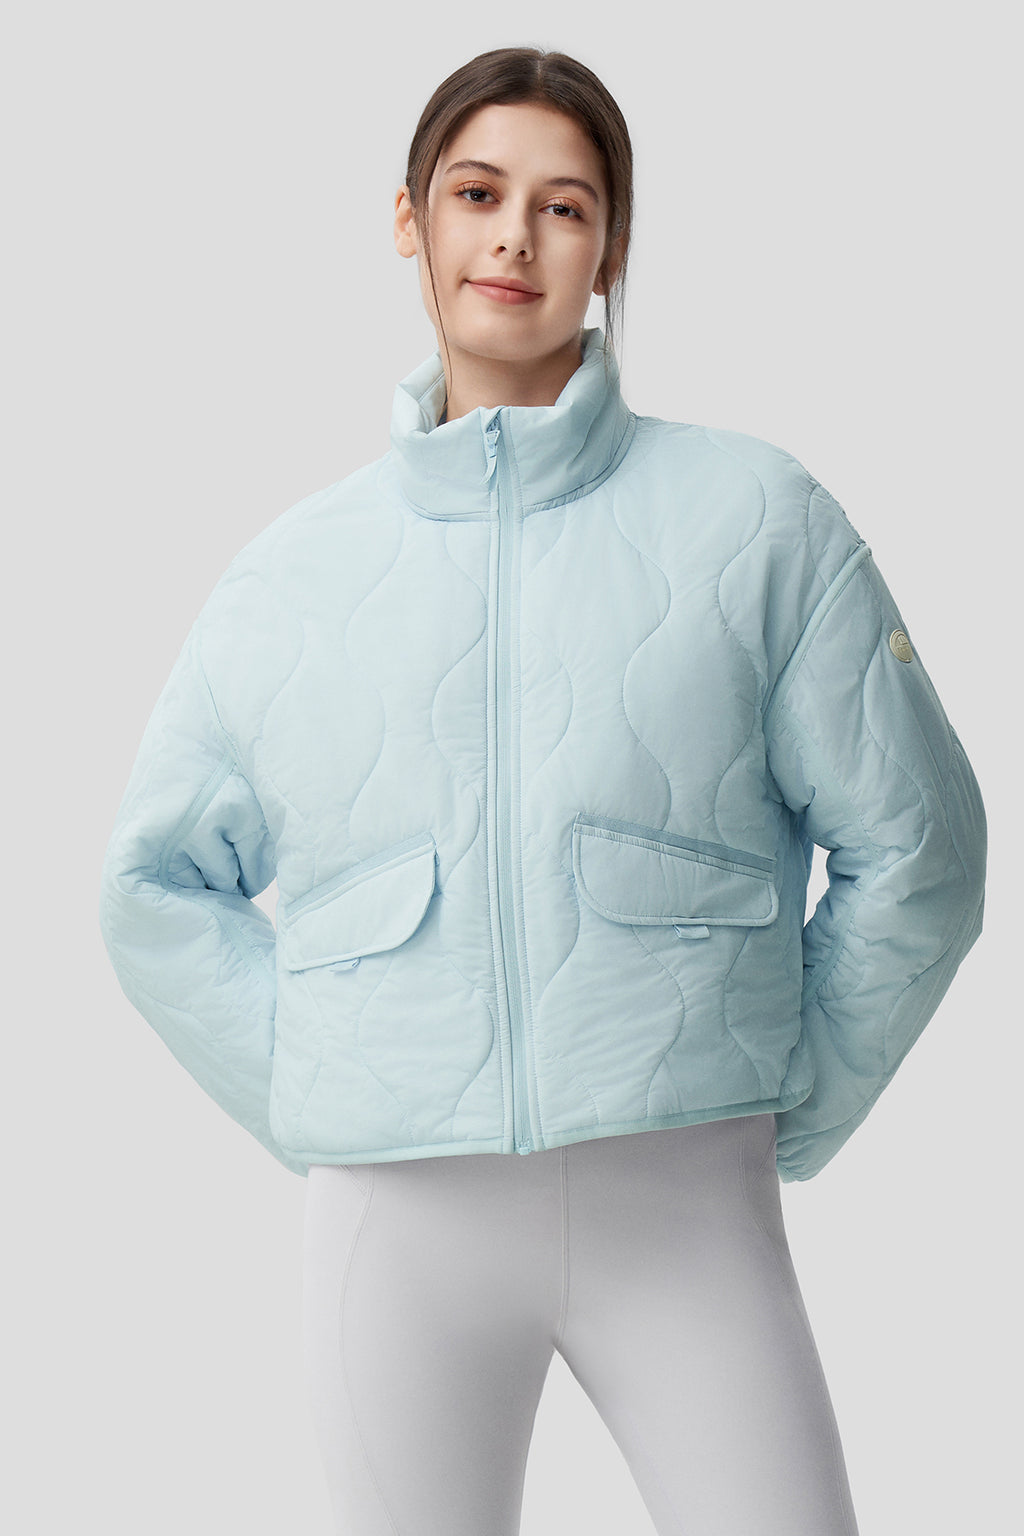 HEZIOWYUN Cropped Puffer Jackets for Women Quilted Lightweight Padded Stand  Collar Zipper Coat Bomber Jacket (White,Small) at  Women's Coats Shop